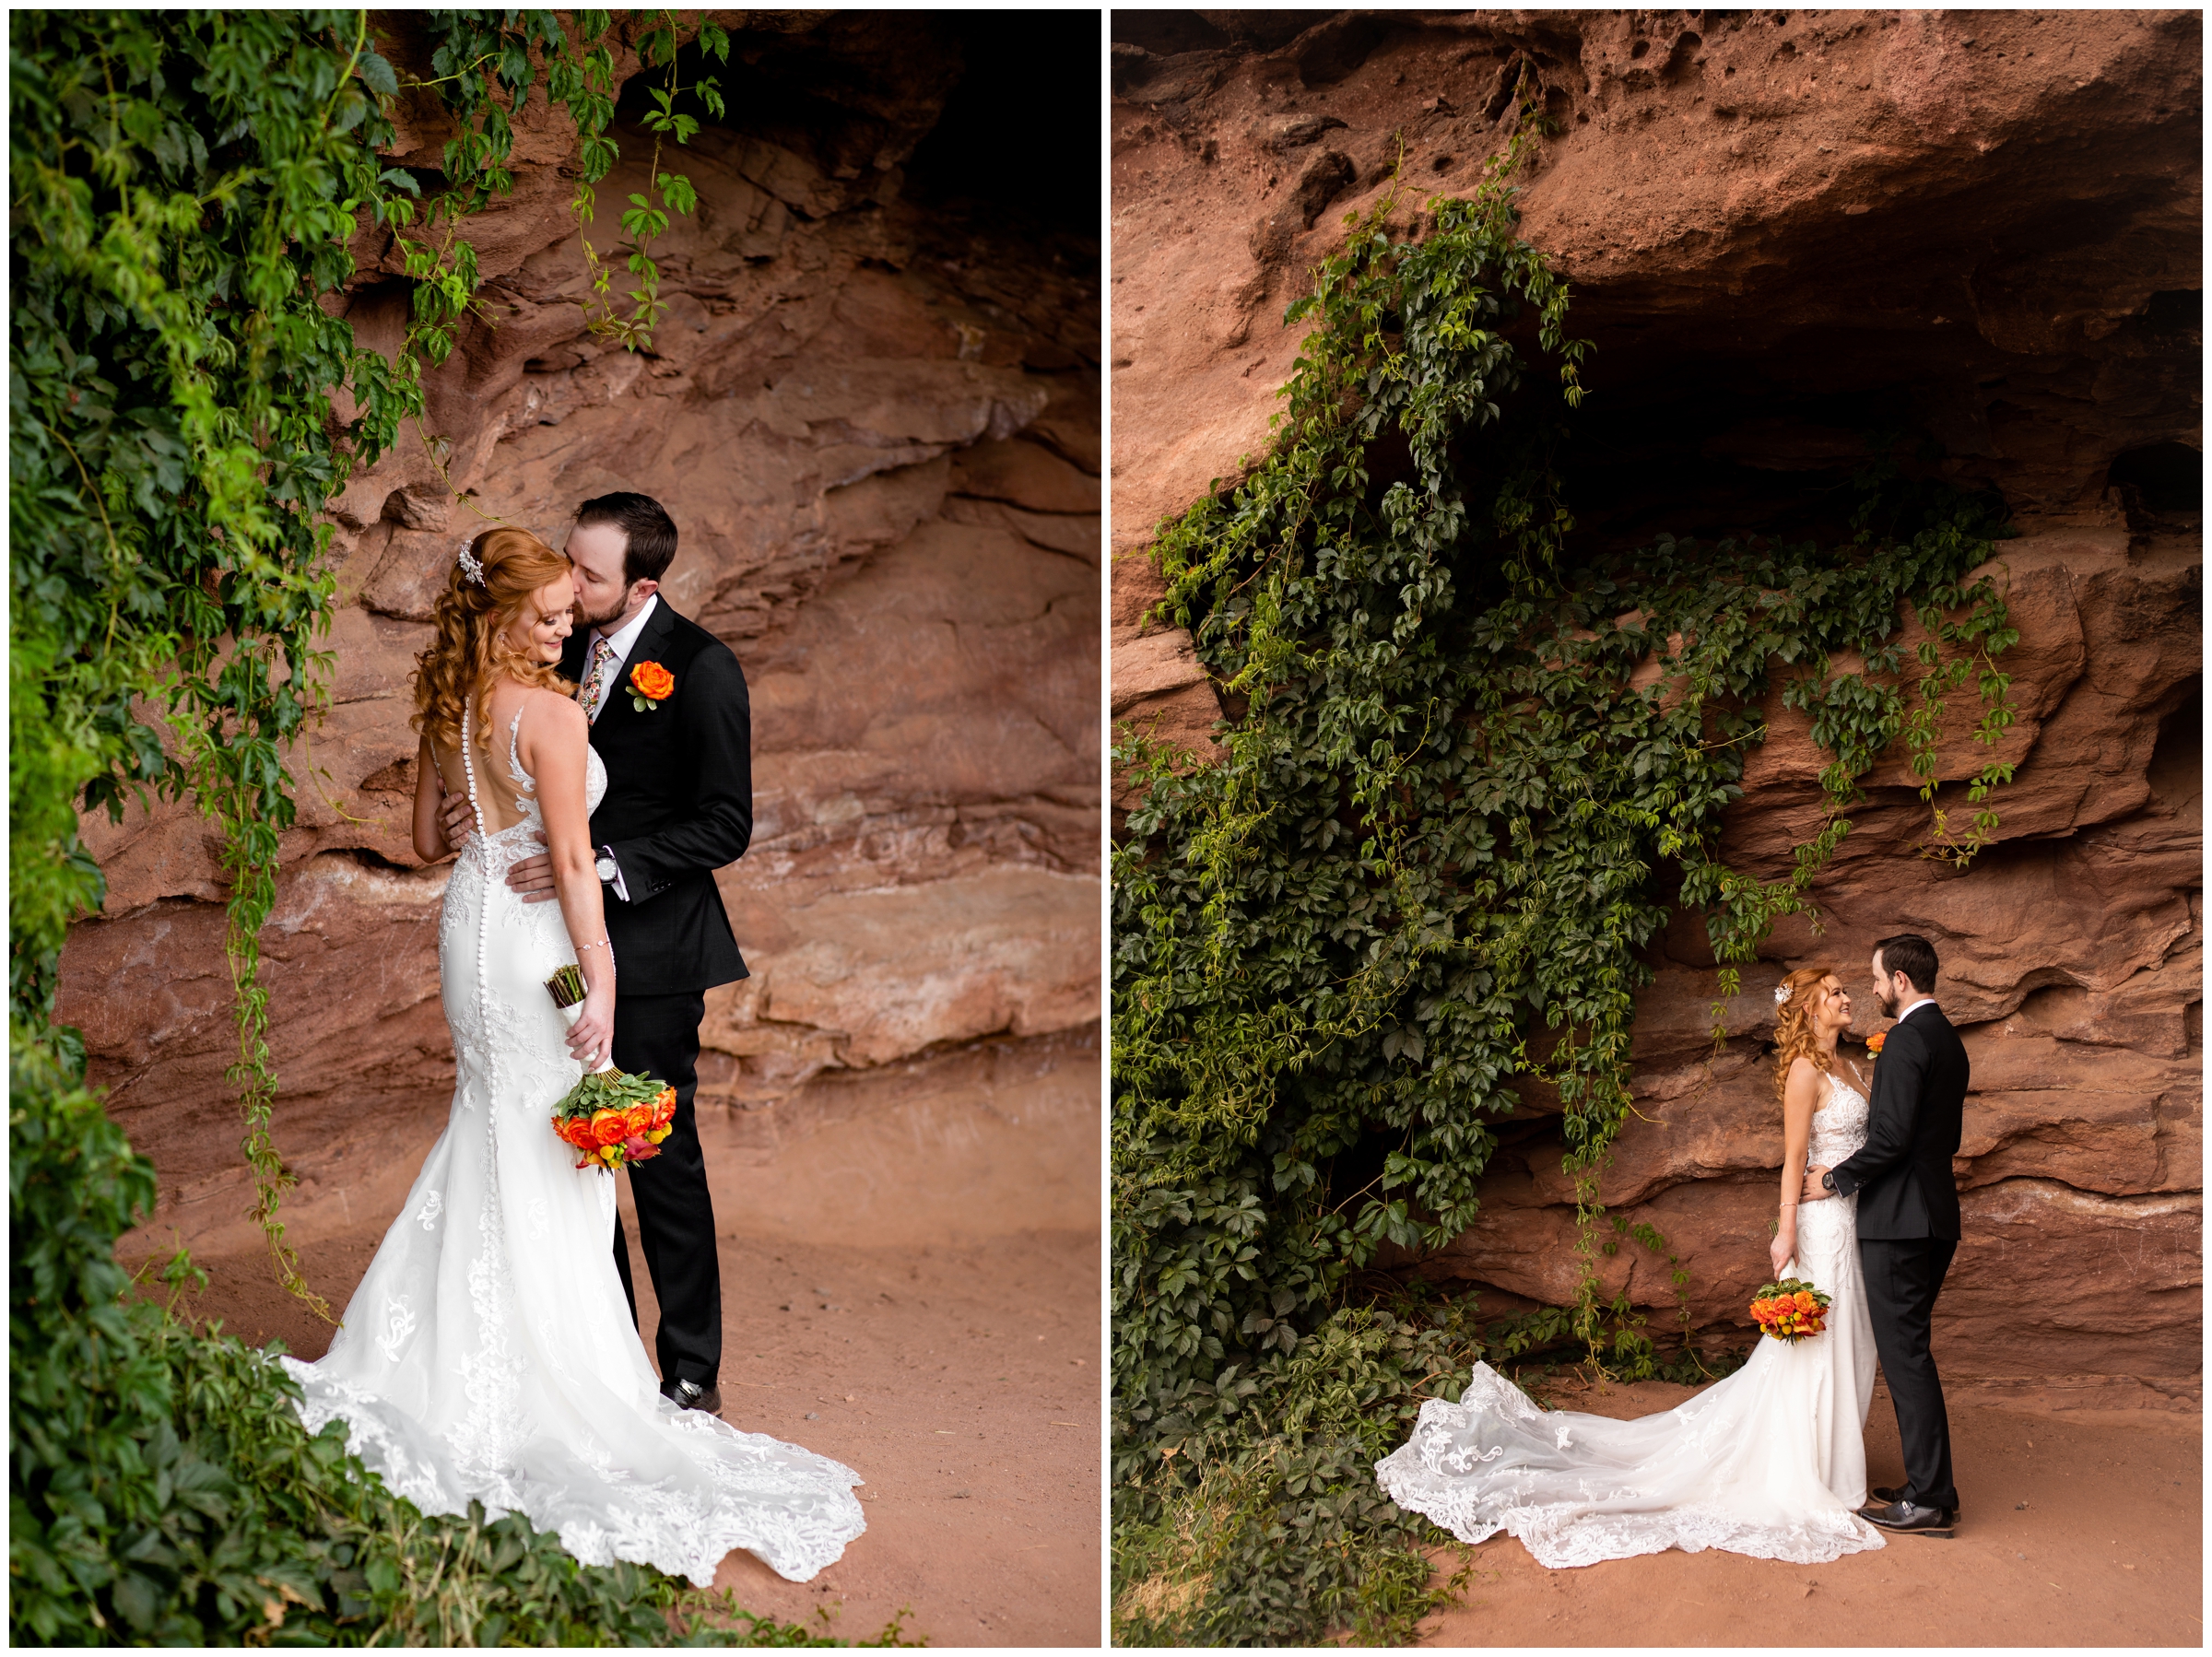 romantic wedding portraits at Red Rocks Amphitheater and Park in Morrison Colorado 